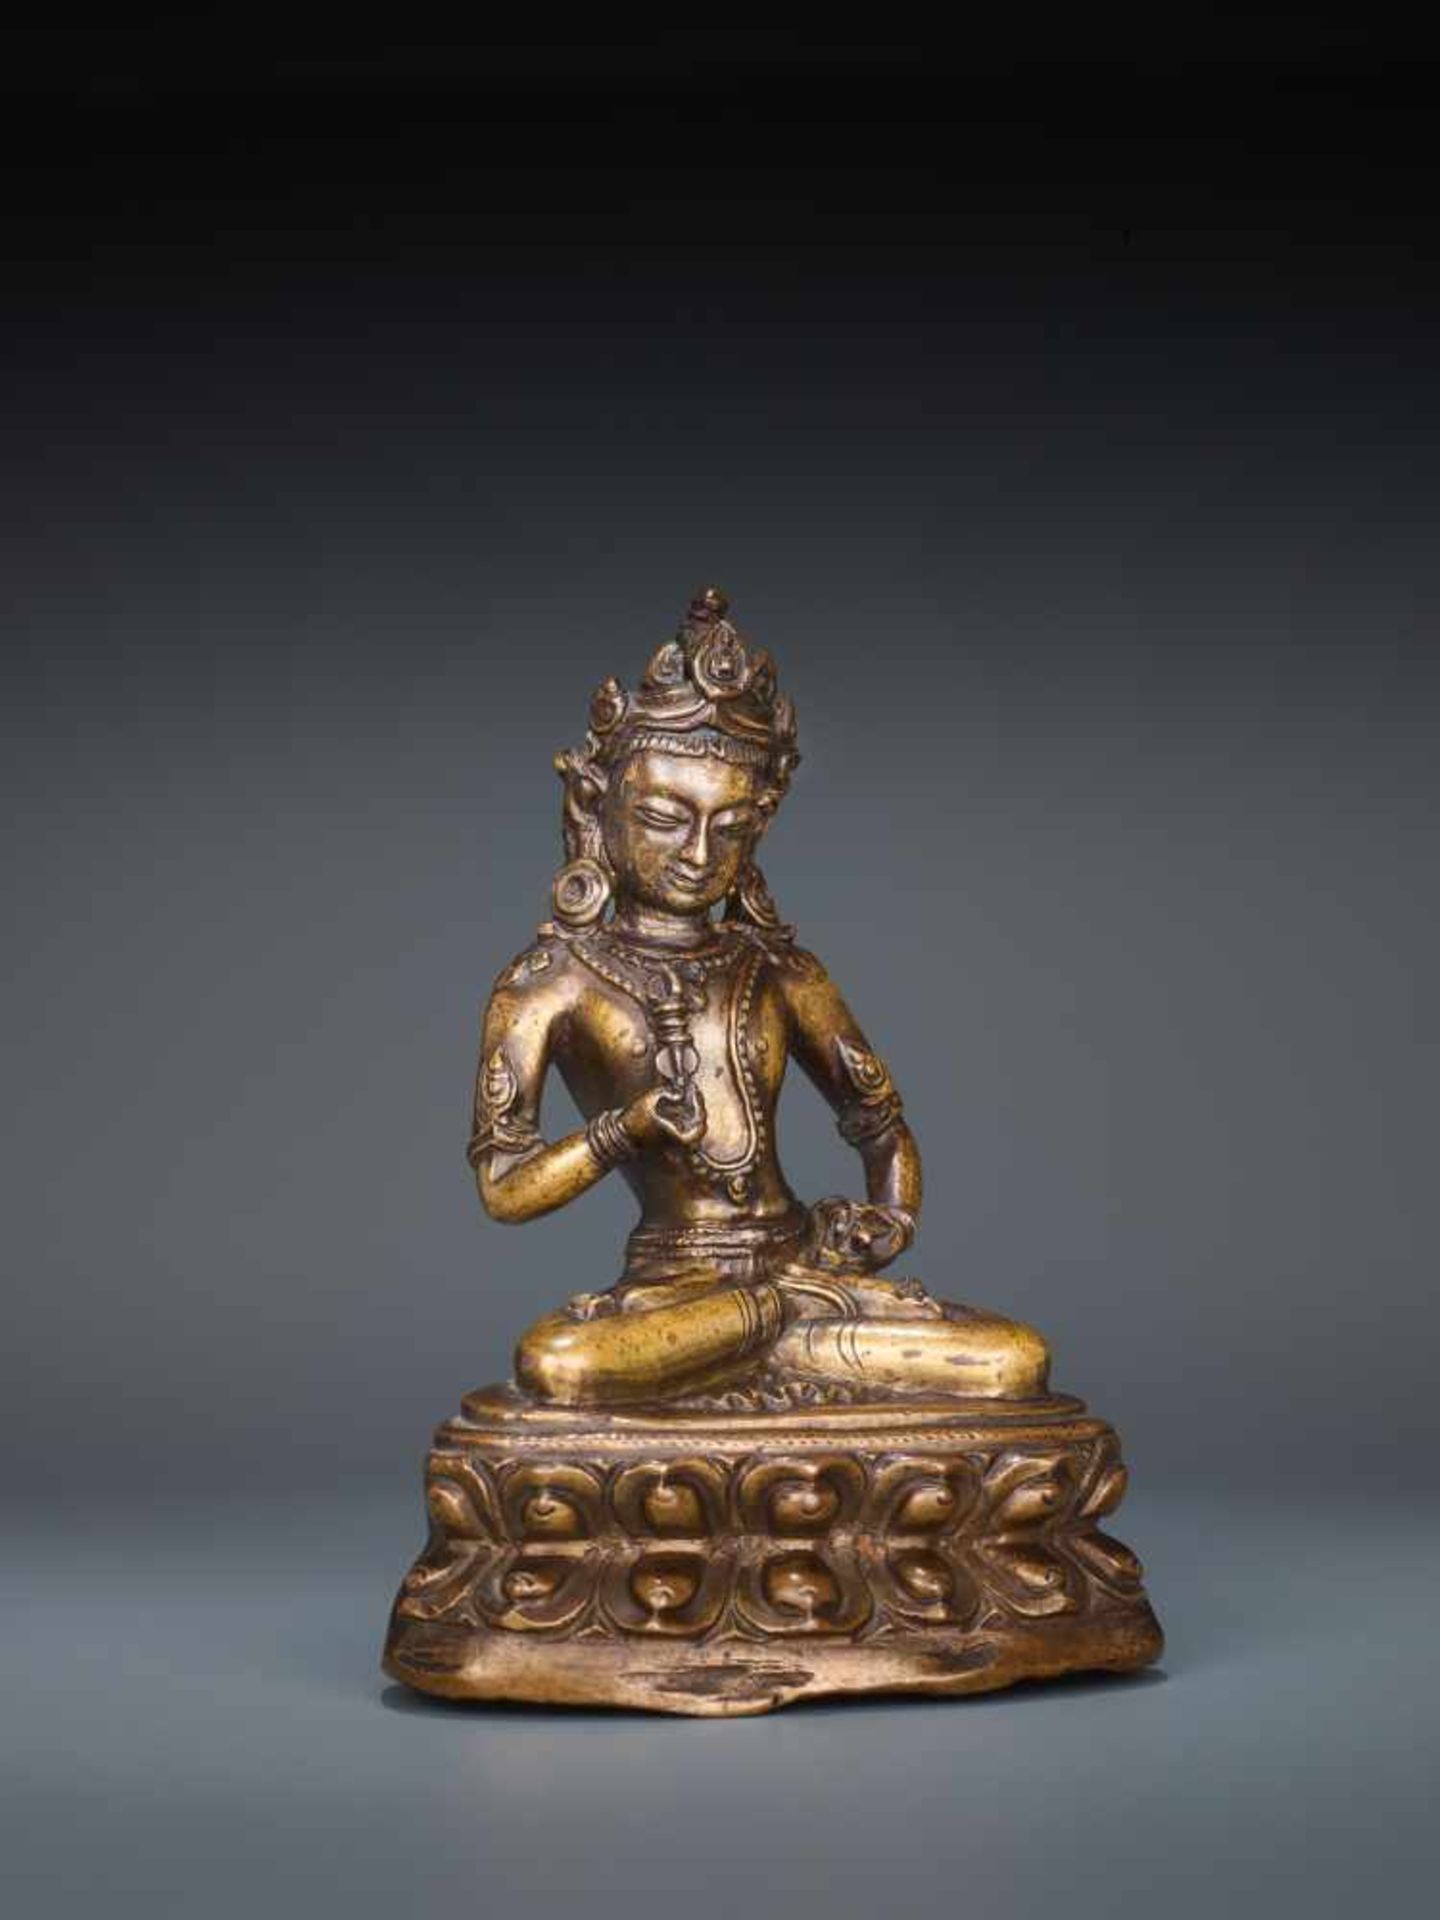 A FINE BRONZE FIGURE OF VAJRASATTVA, TIBET, 16th - 17th CENTURYCast and chased bronze Tibet, - Image 3 of 6